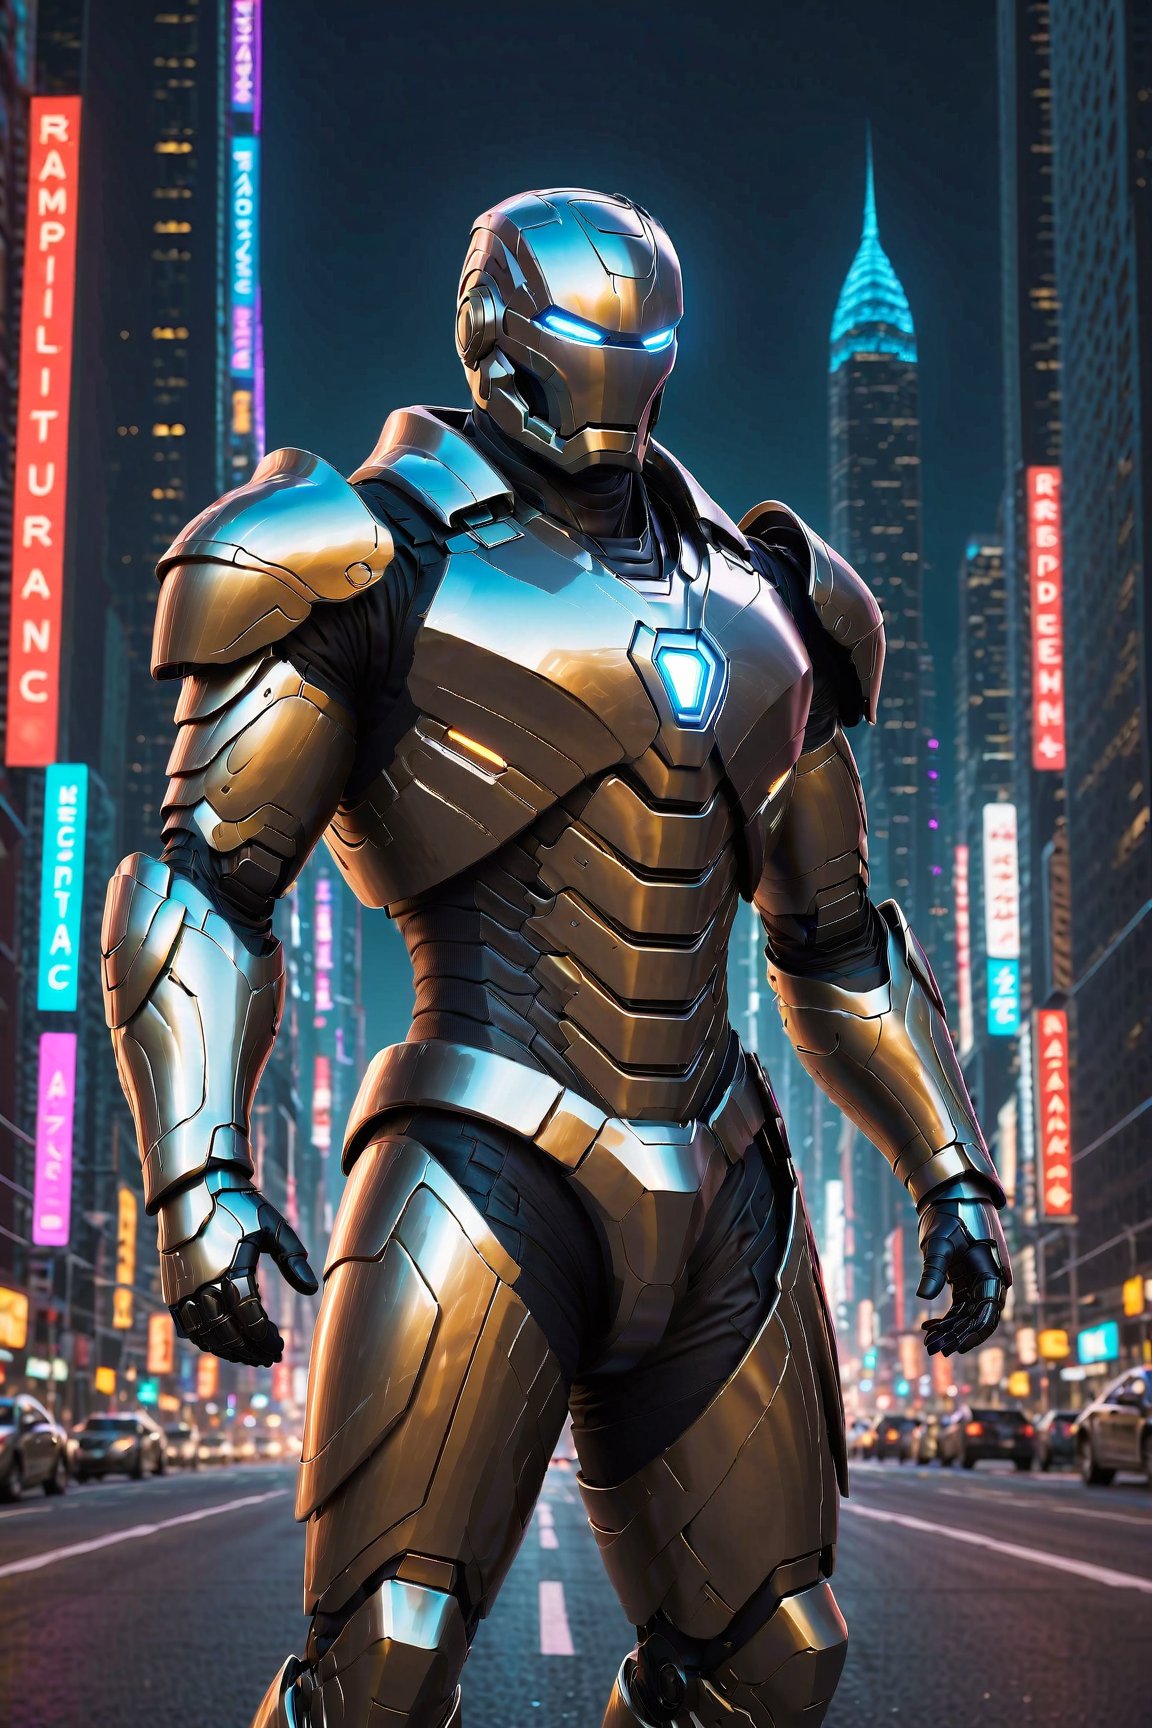 "A powerful Iron Man suit, adorned with glowing repulsors and advanced weaponry, standing tall and proud against a backdrop of city lights."